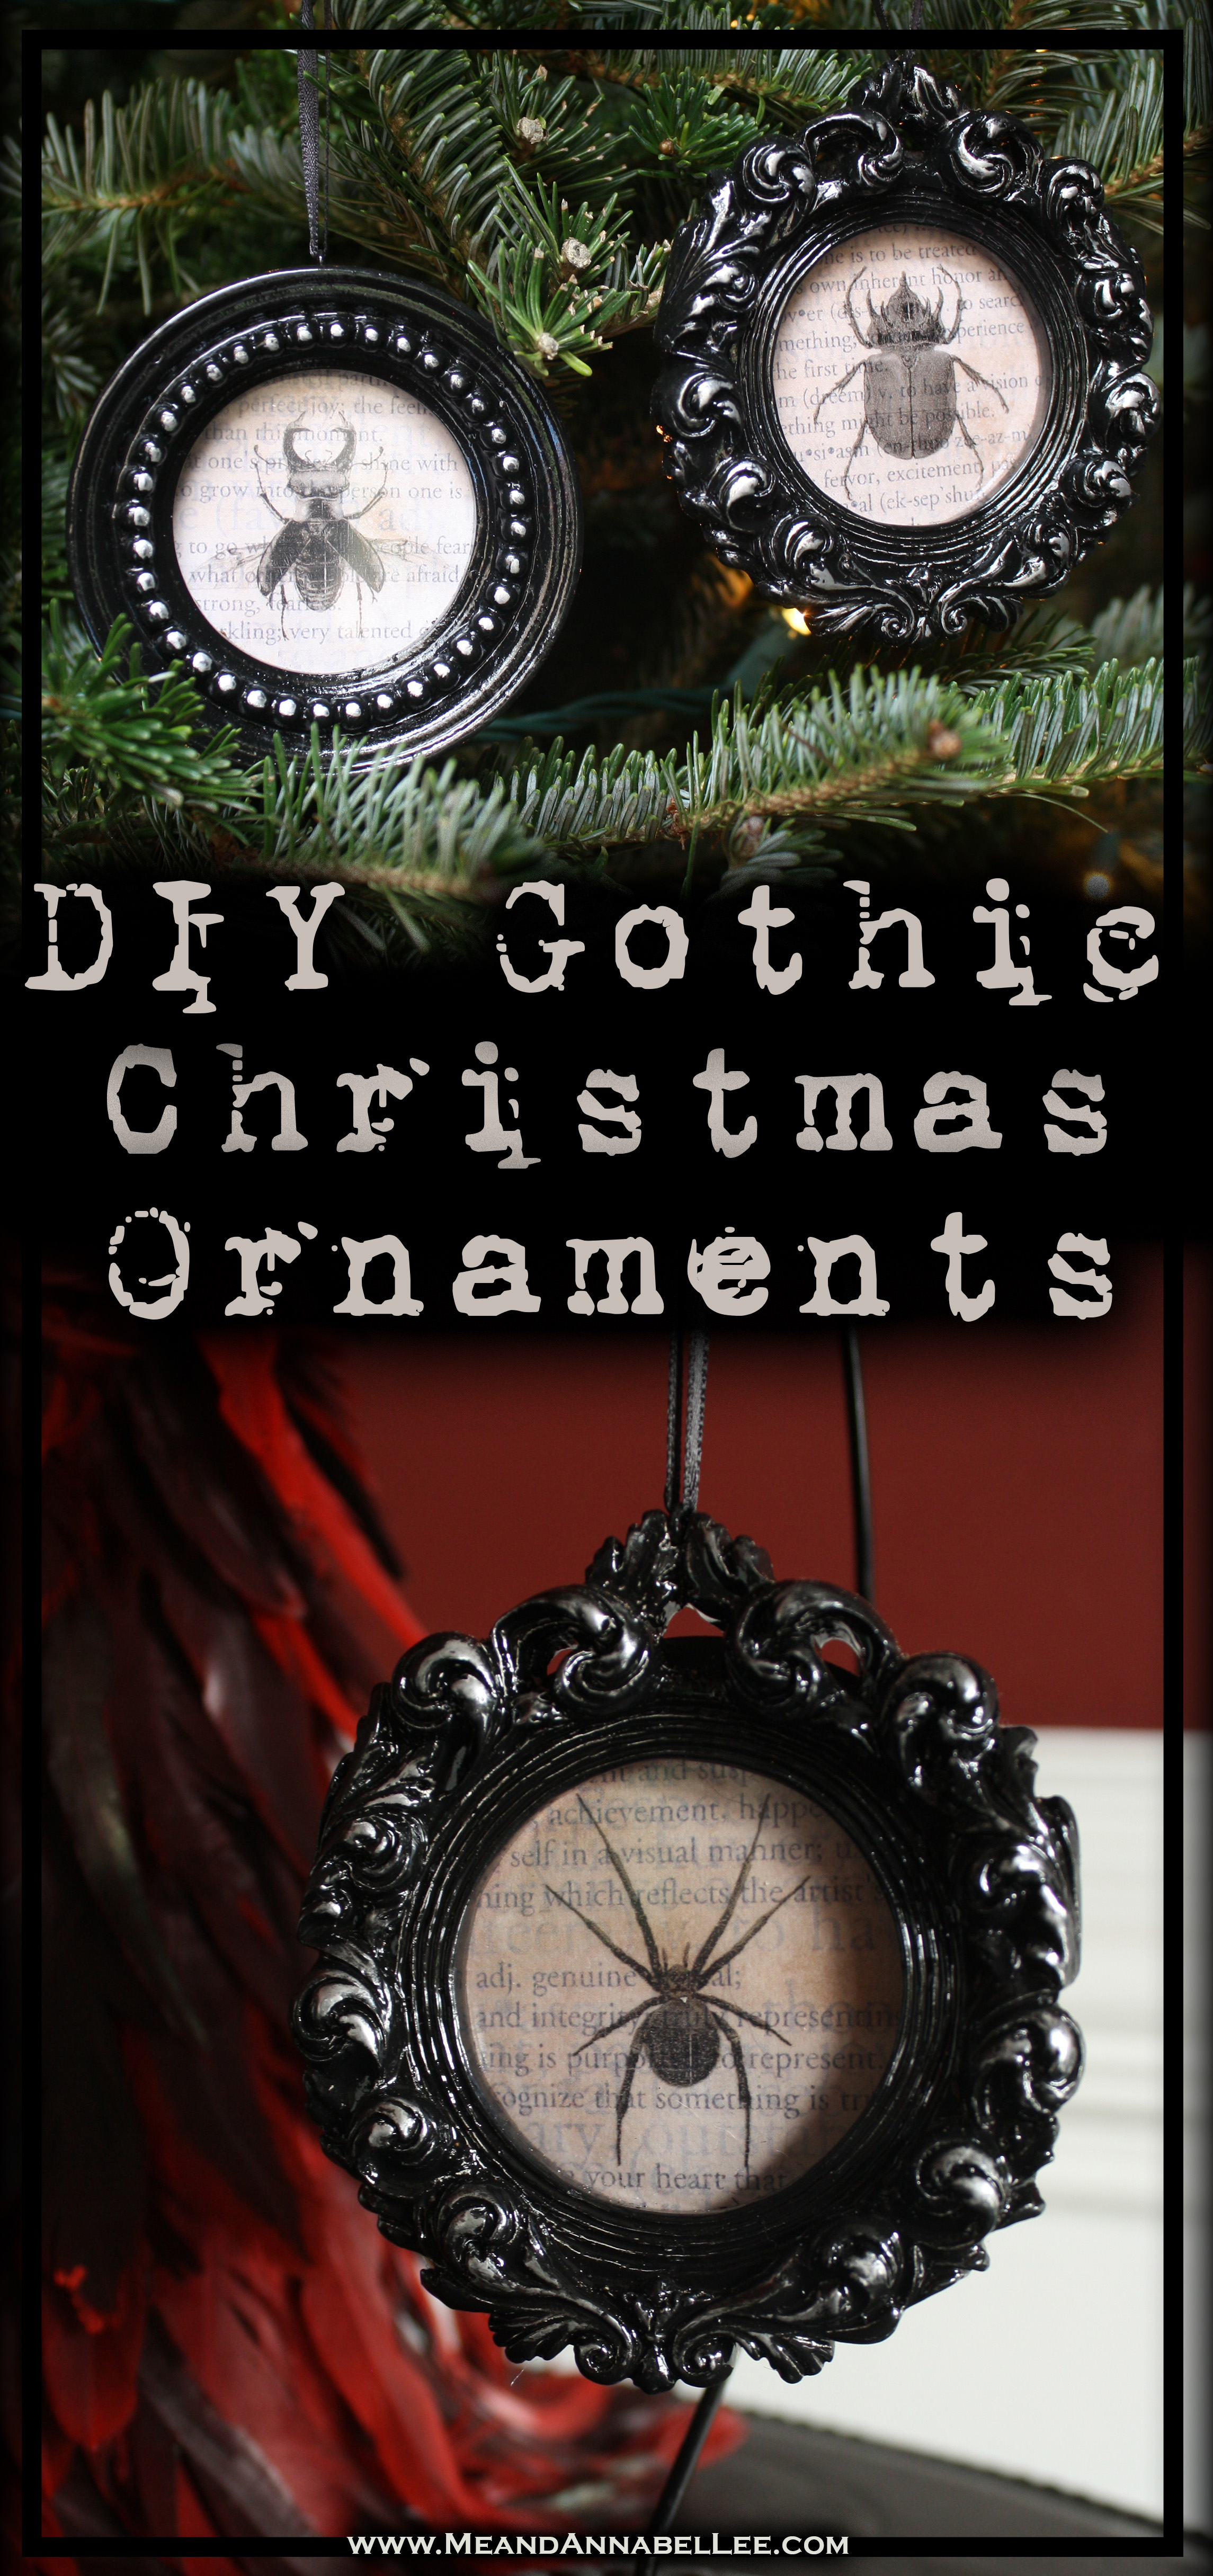 DIY Gothic Christmas Ornaments | Vintage Insect Specimens | Halloween Everyday | Black Baroque Frames | Rub n Buff | Sihouette Sticker Paper | www.MeandAnnabelLee.com